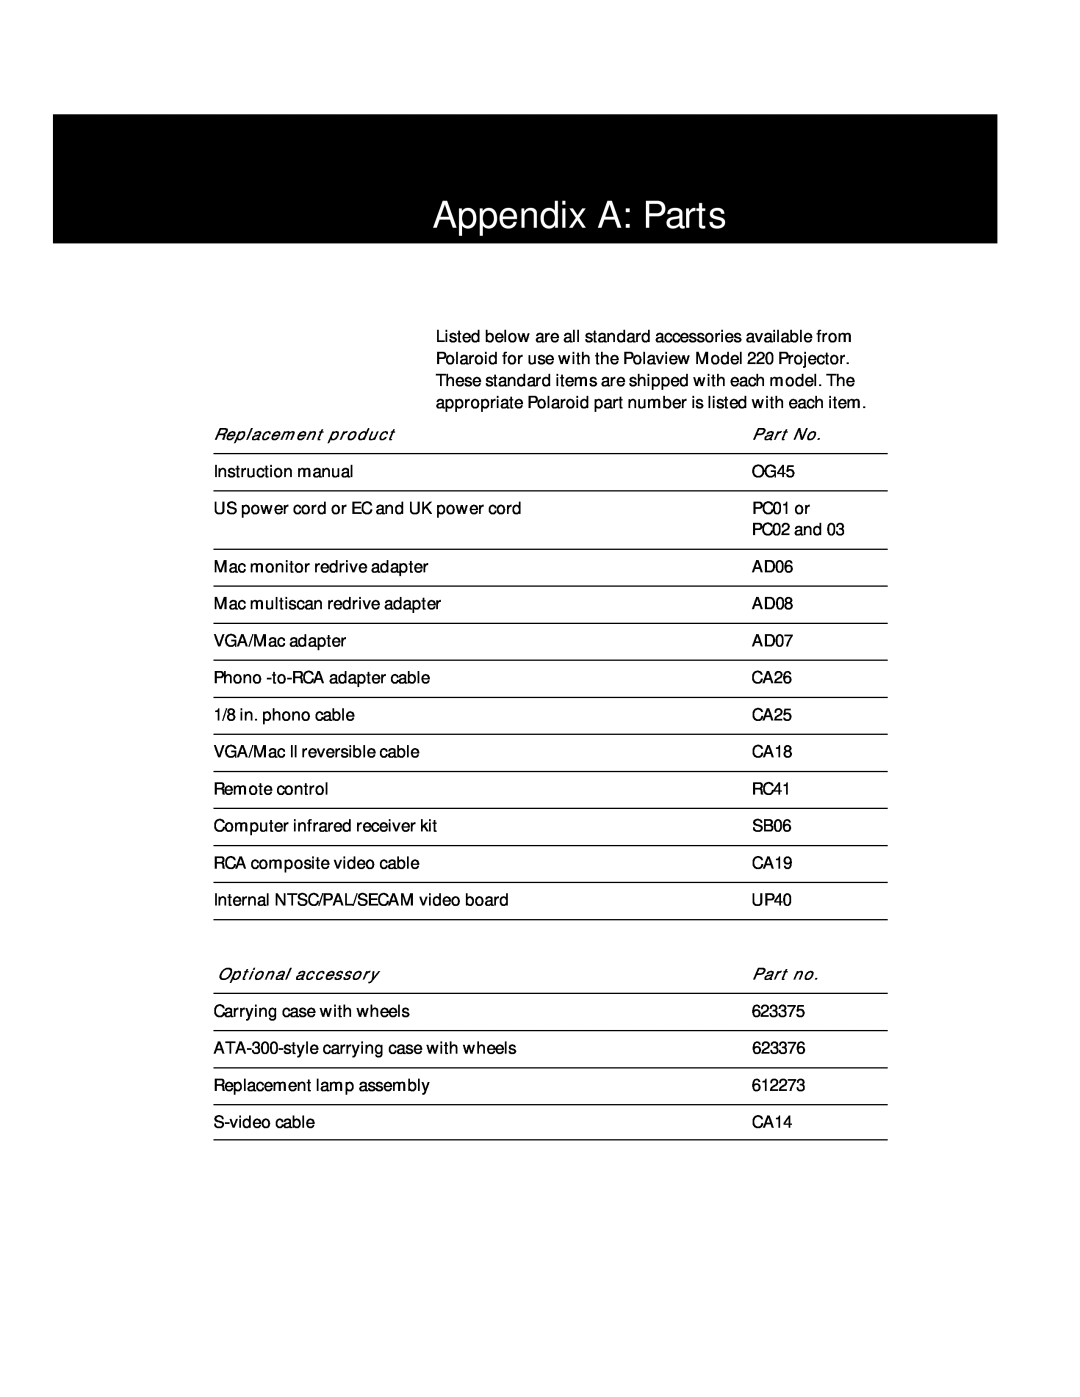 Polaroid Polaview 220 manual Appendix A Parts, Replacement product, Optional accessory 